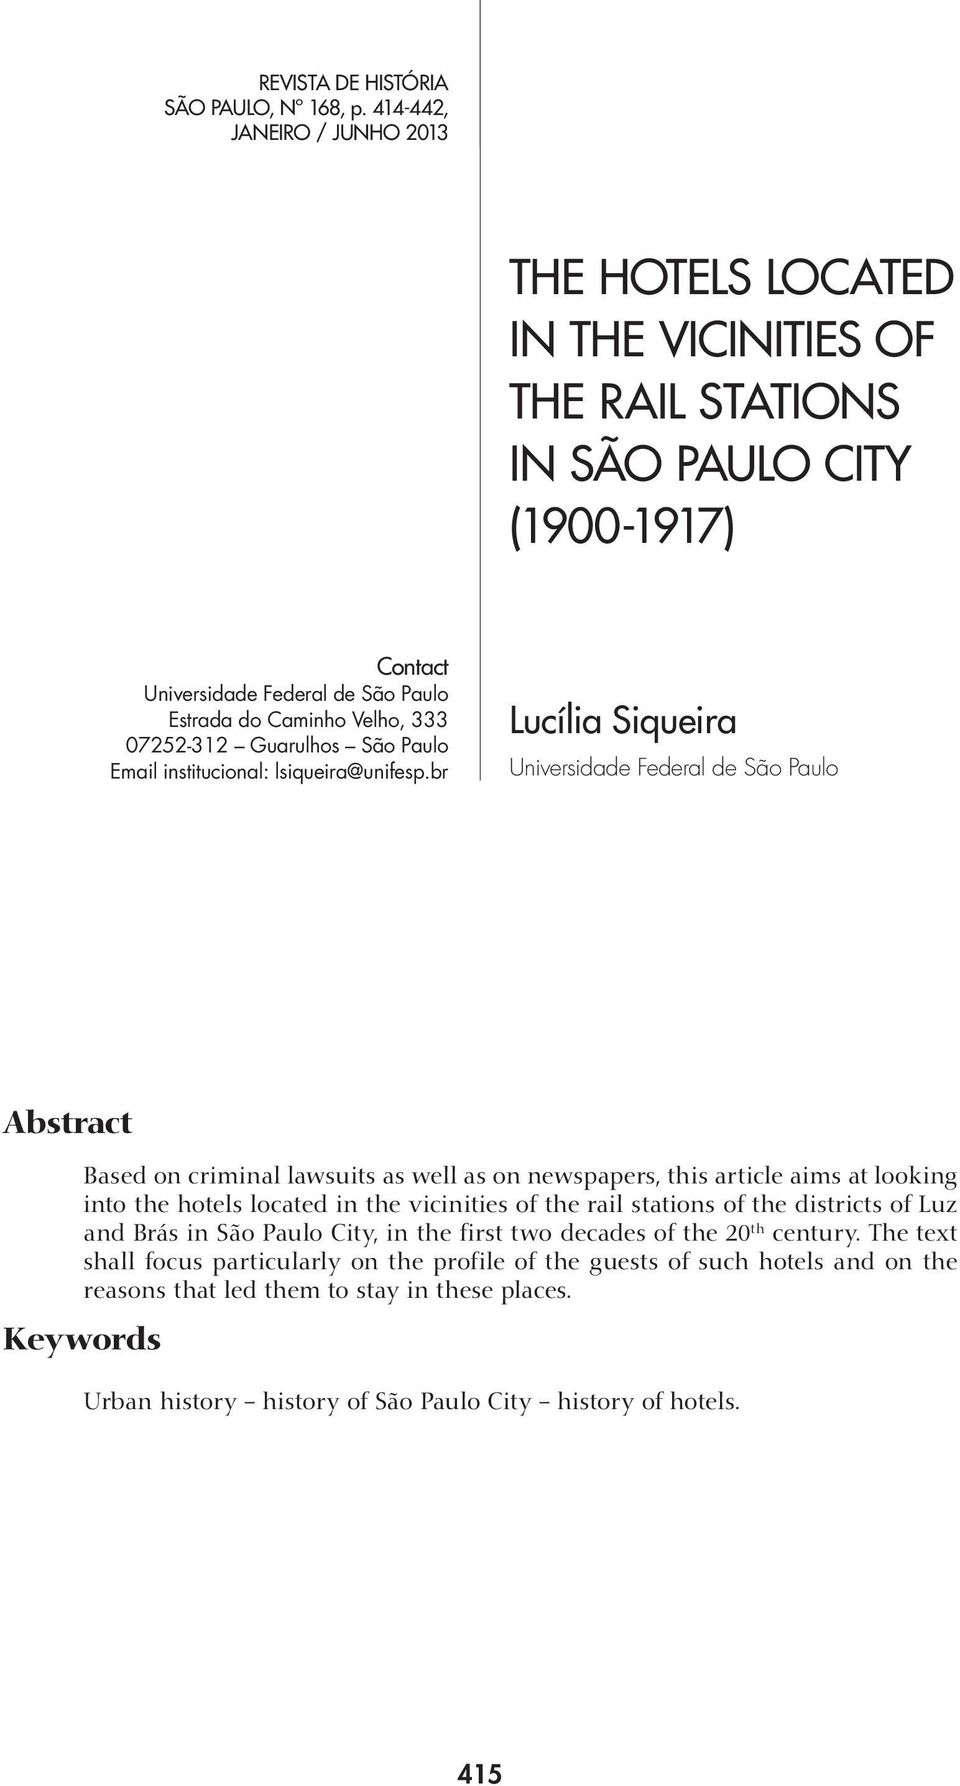 br Universidade Federal de São Paulo Abstract Based on criminal lawsuits as well as on newspapers, this article aims at looking into the hotels located in the vicinities of the